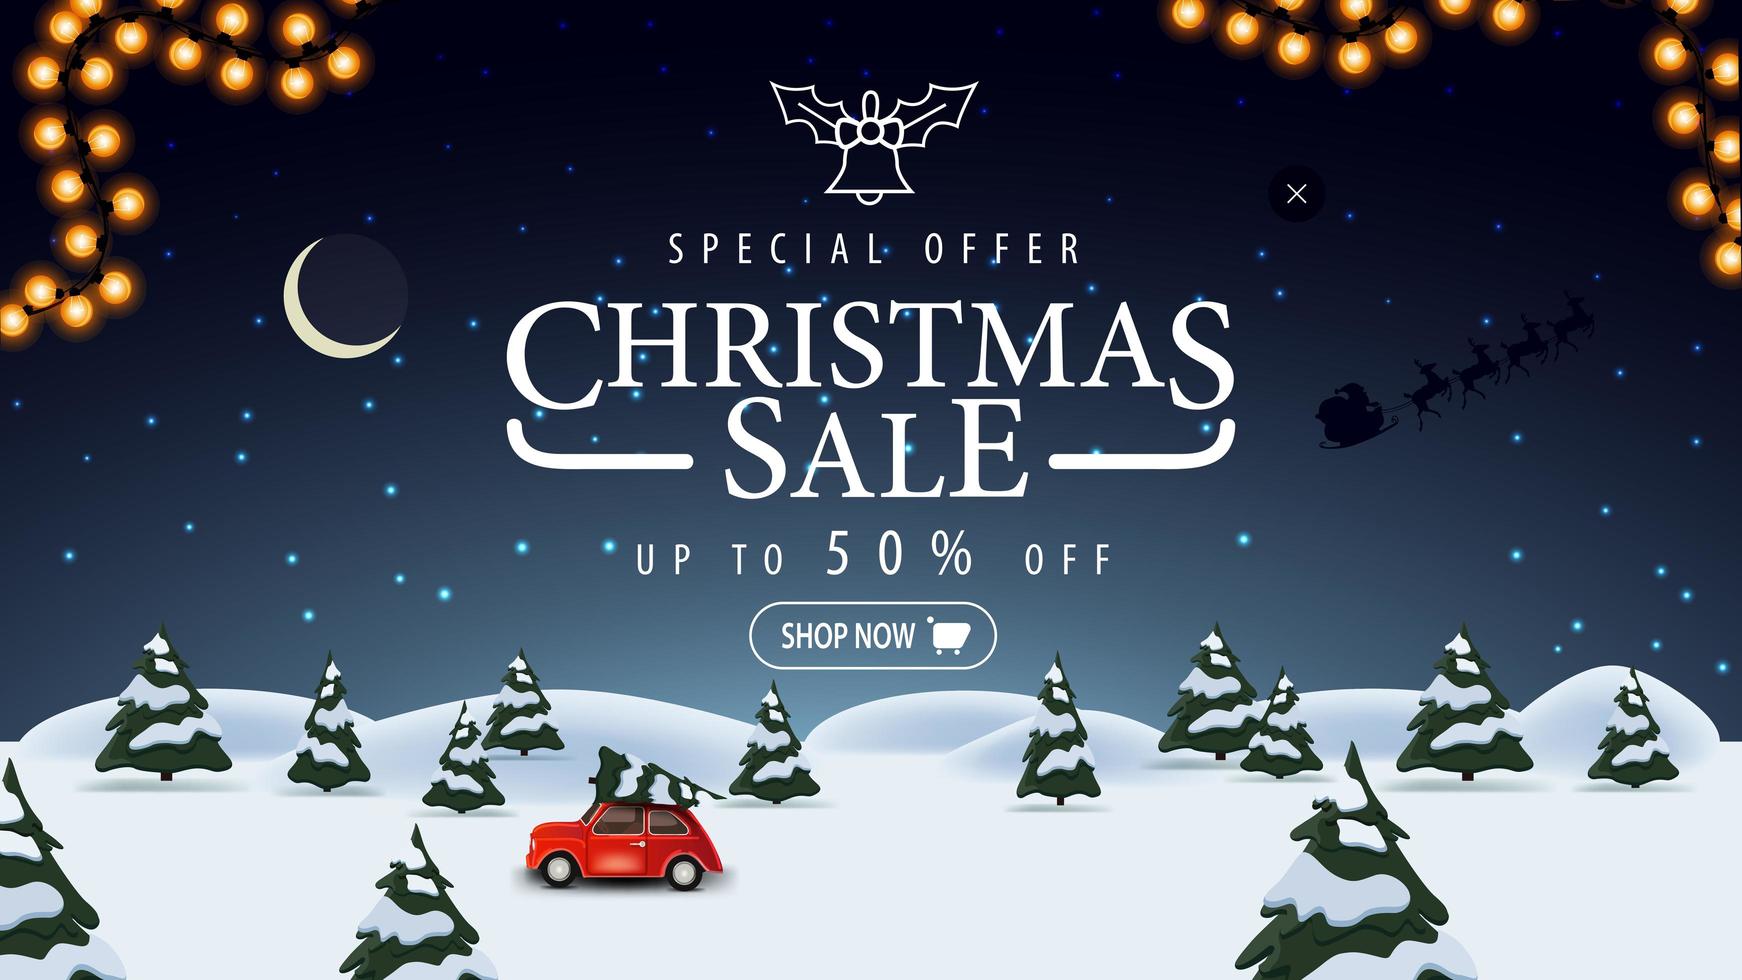 Special offer, Christmas sale, up to 50 off, blue discount banner with night winter landscape on background, starry sky and red vintage car carrying Christmas tree vector